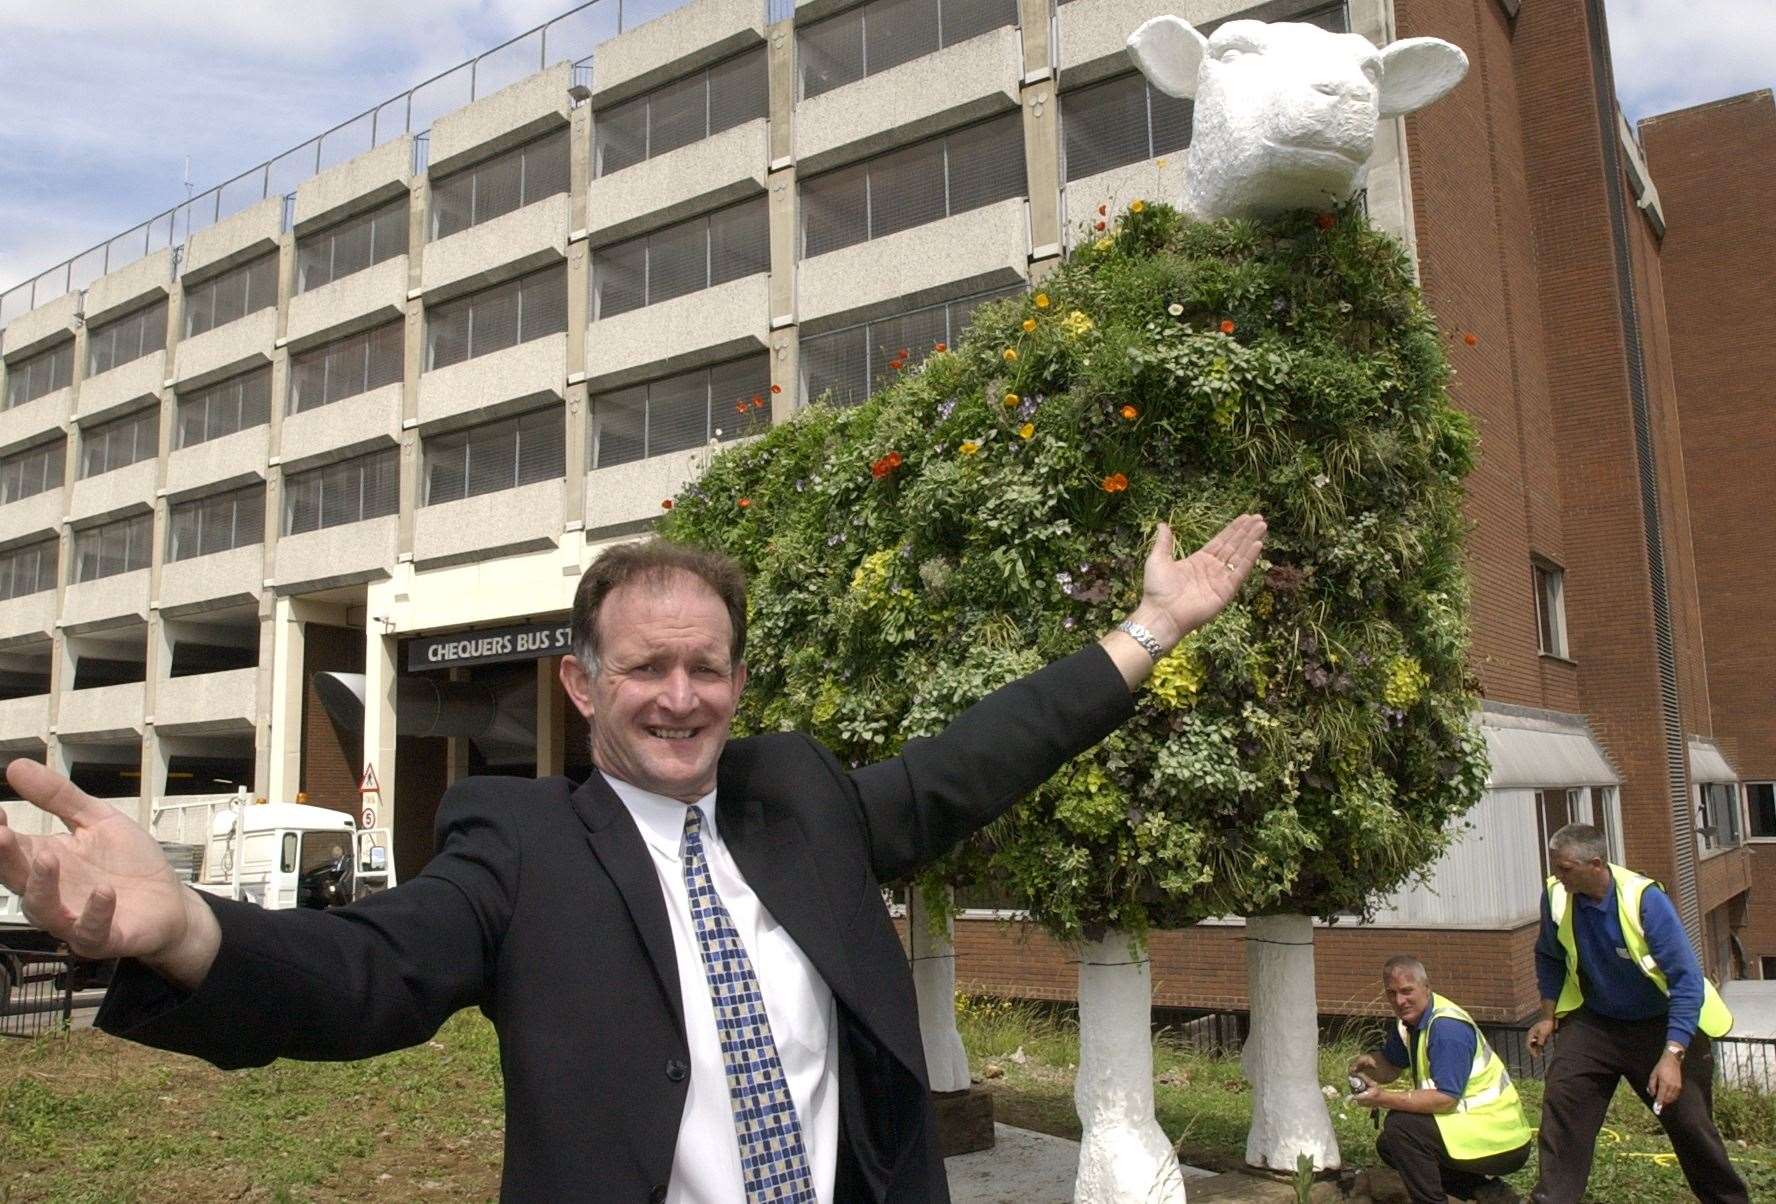 Shorn when he arrived in Maidstone town centre in 2002. He is pictured with then Town Centre Manager Paul Alcock, who passed away last year. Picture: John Wardley